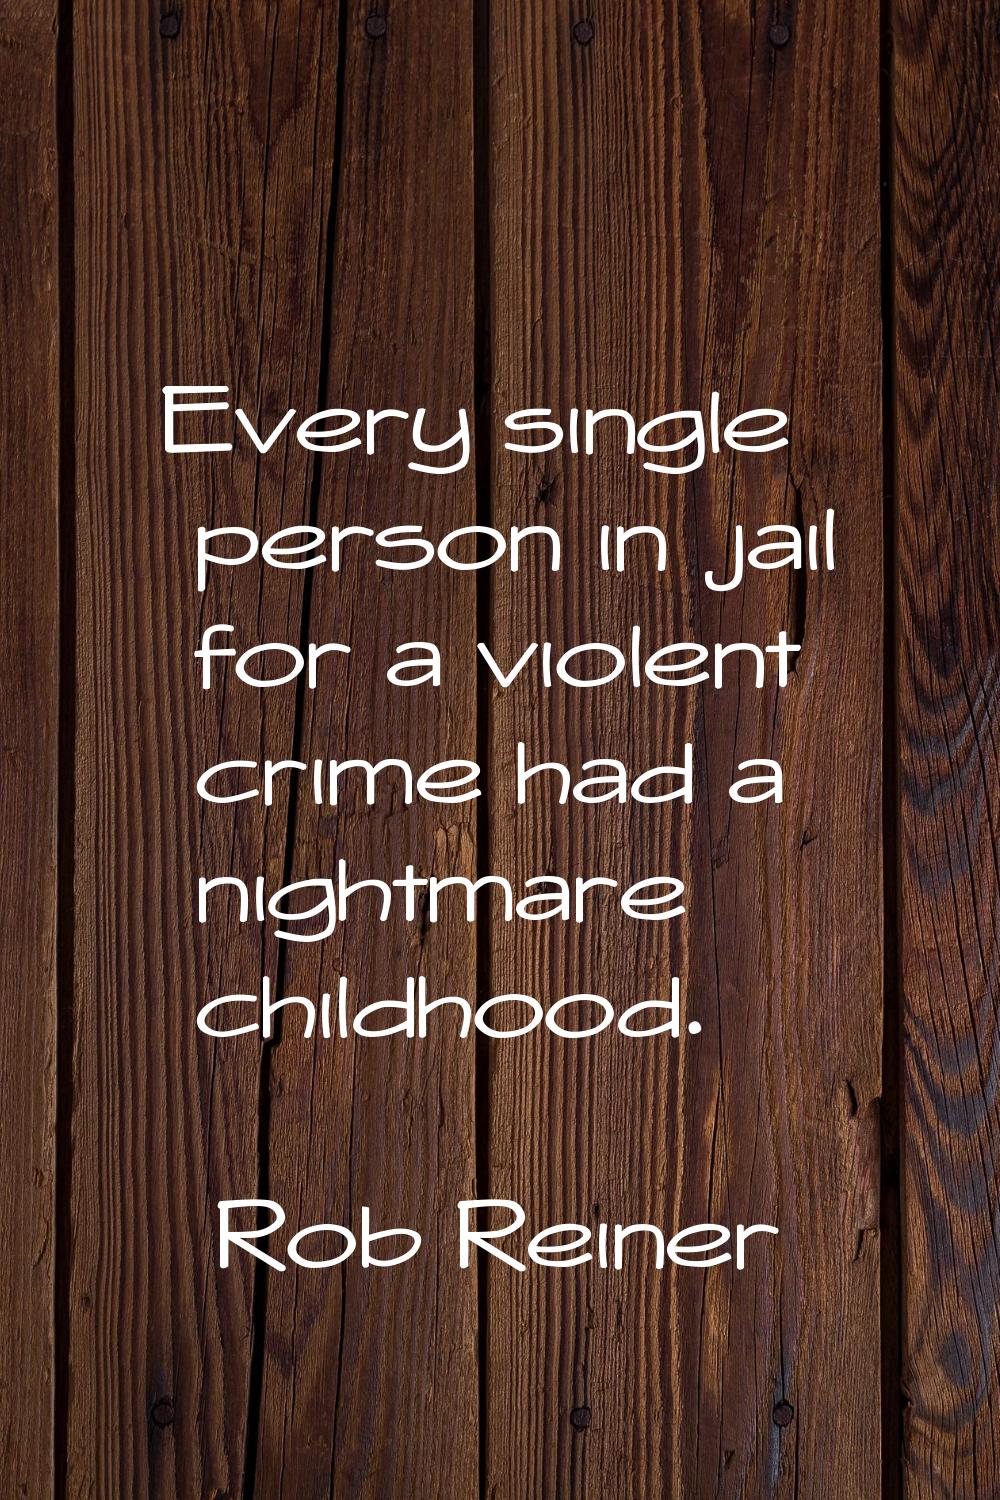 Every single person in jail for a violent crime had a nightmare childhood.